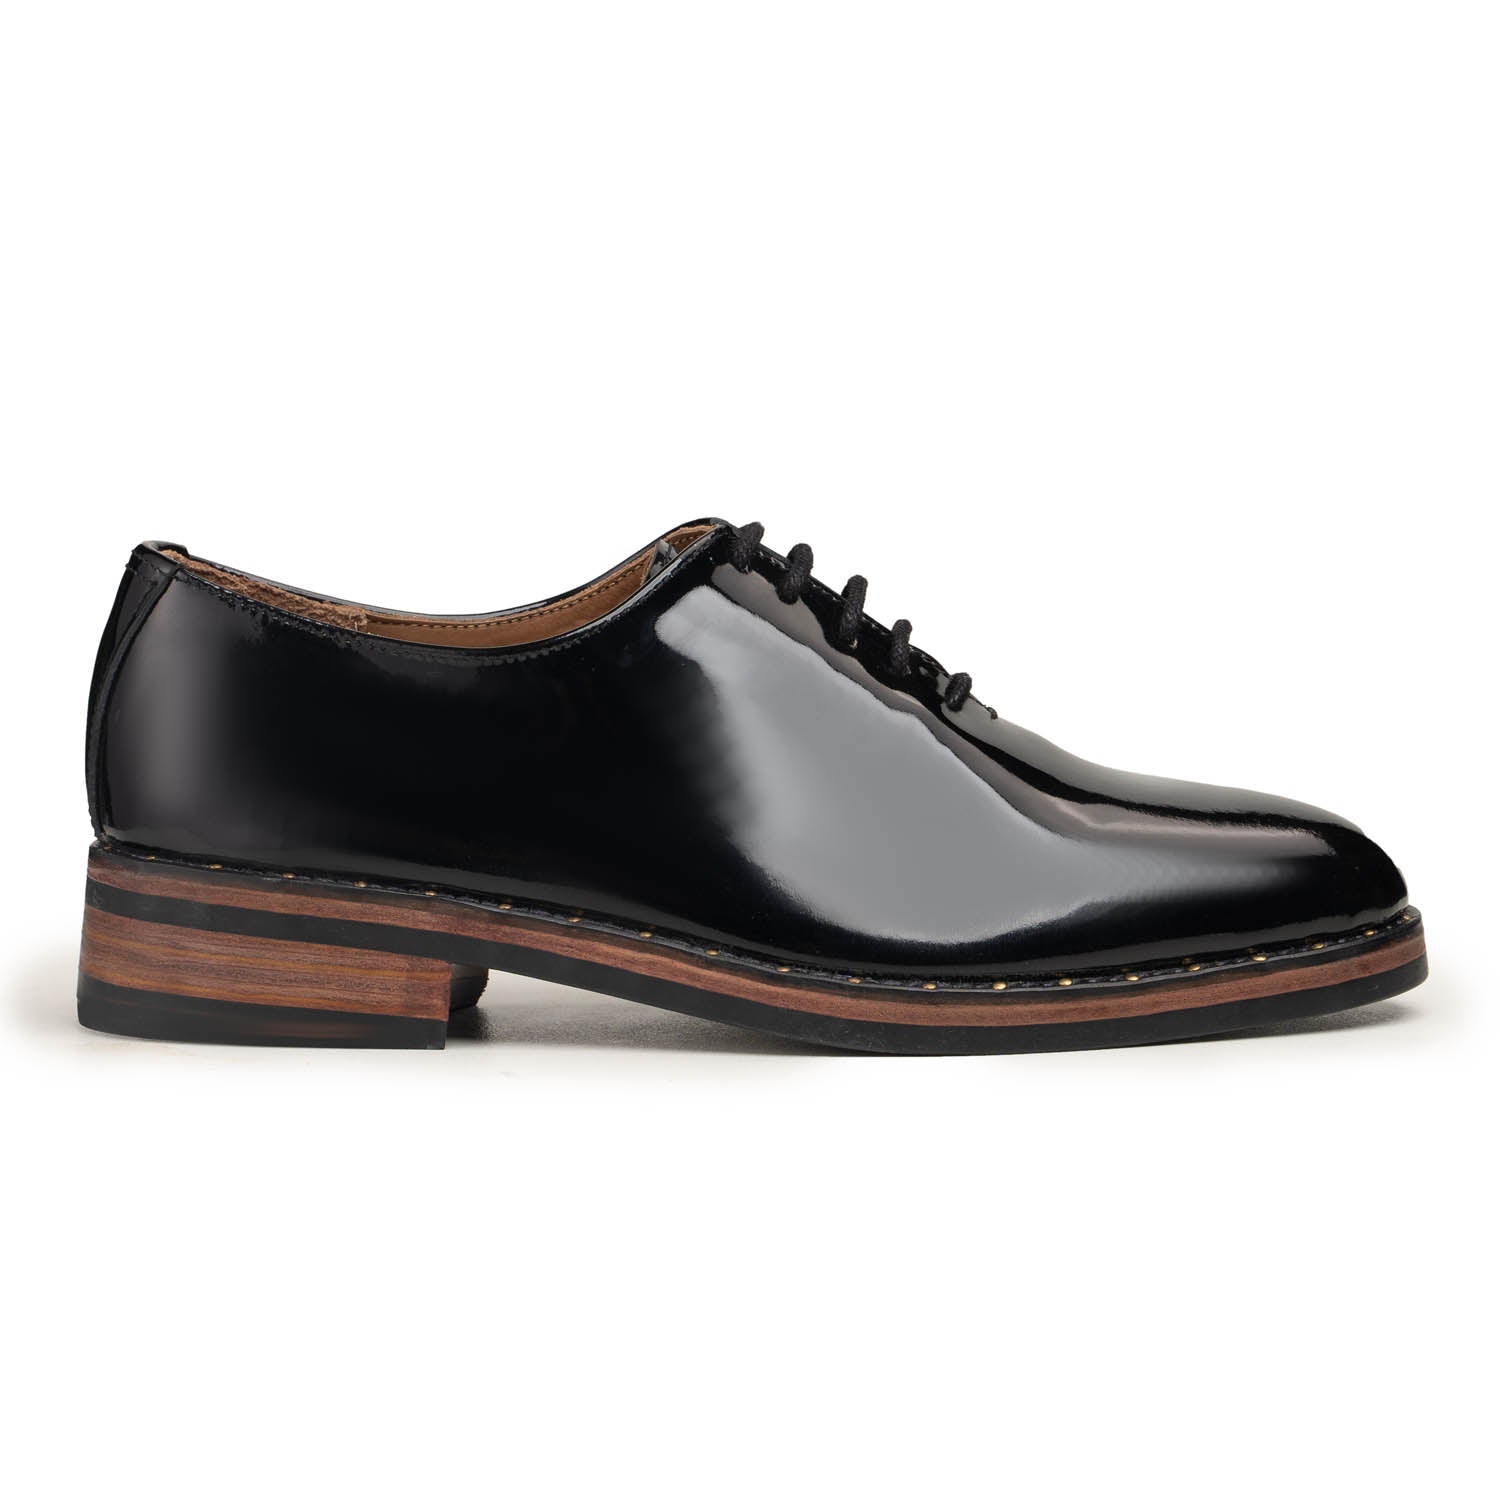 Wholecut Leather Shoes | Buy Online at Best Price | Collin Brian